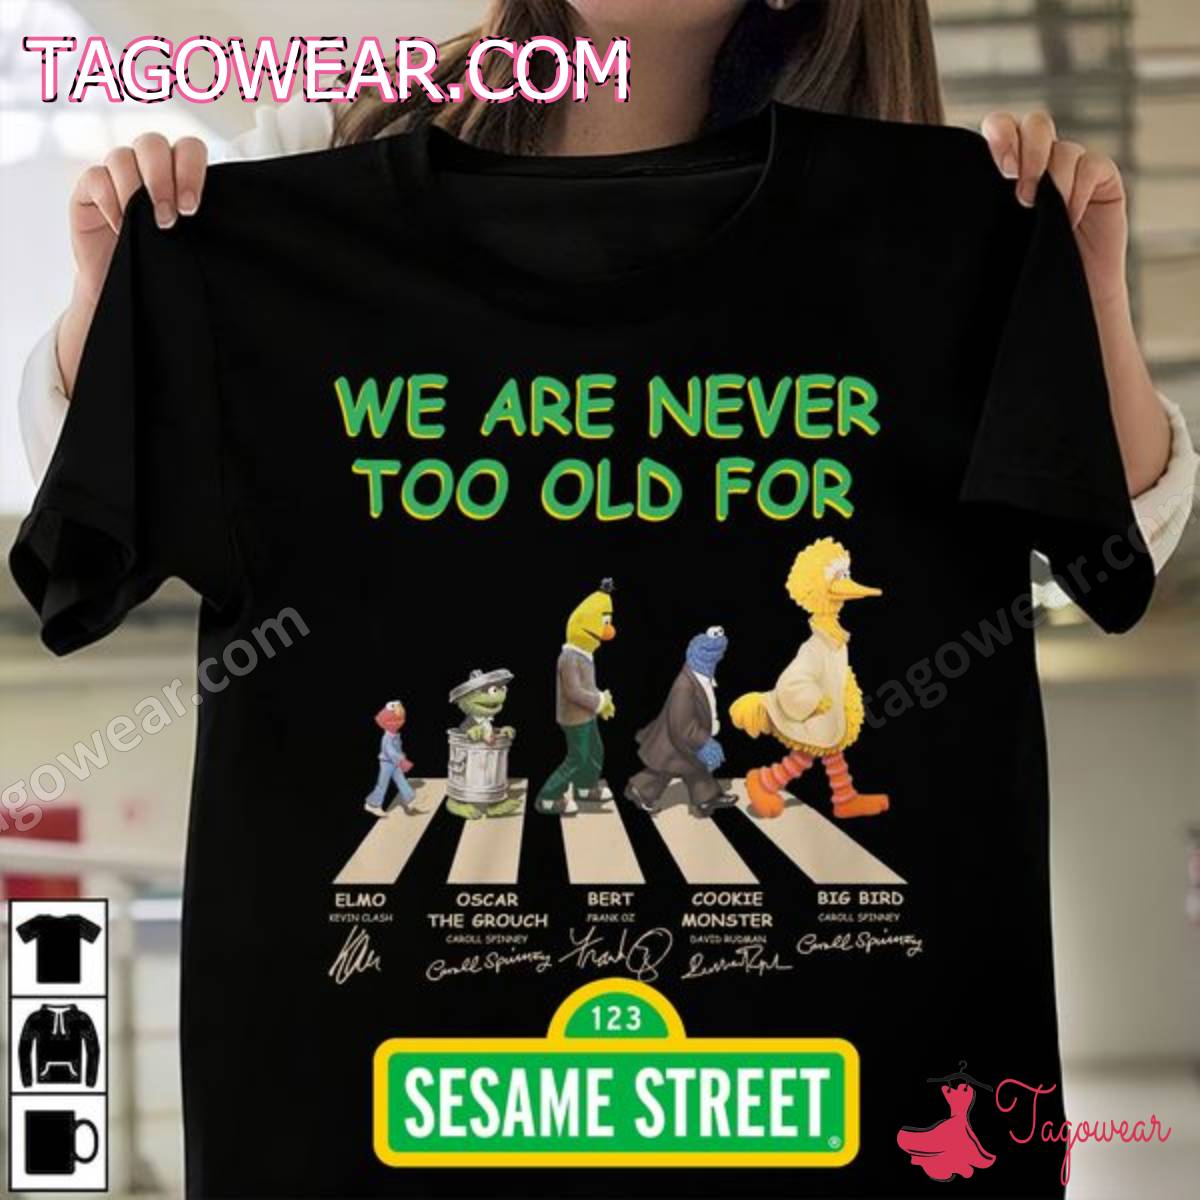 We Are Never Too Old For 123 Sesame Street On Road Signatures Shirt